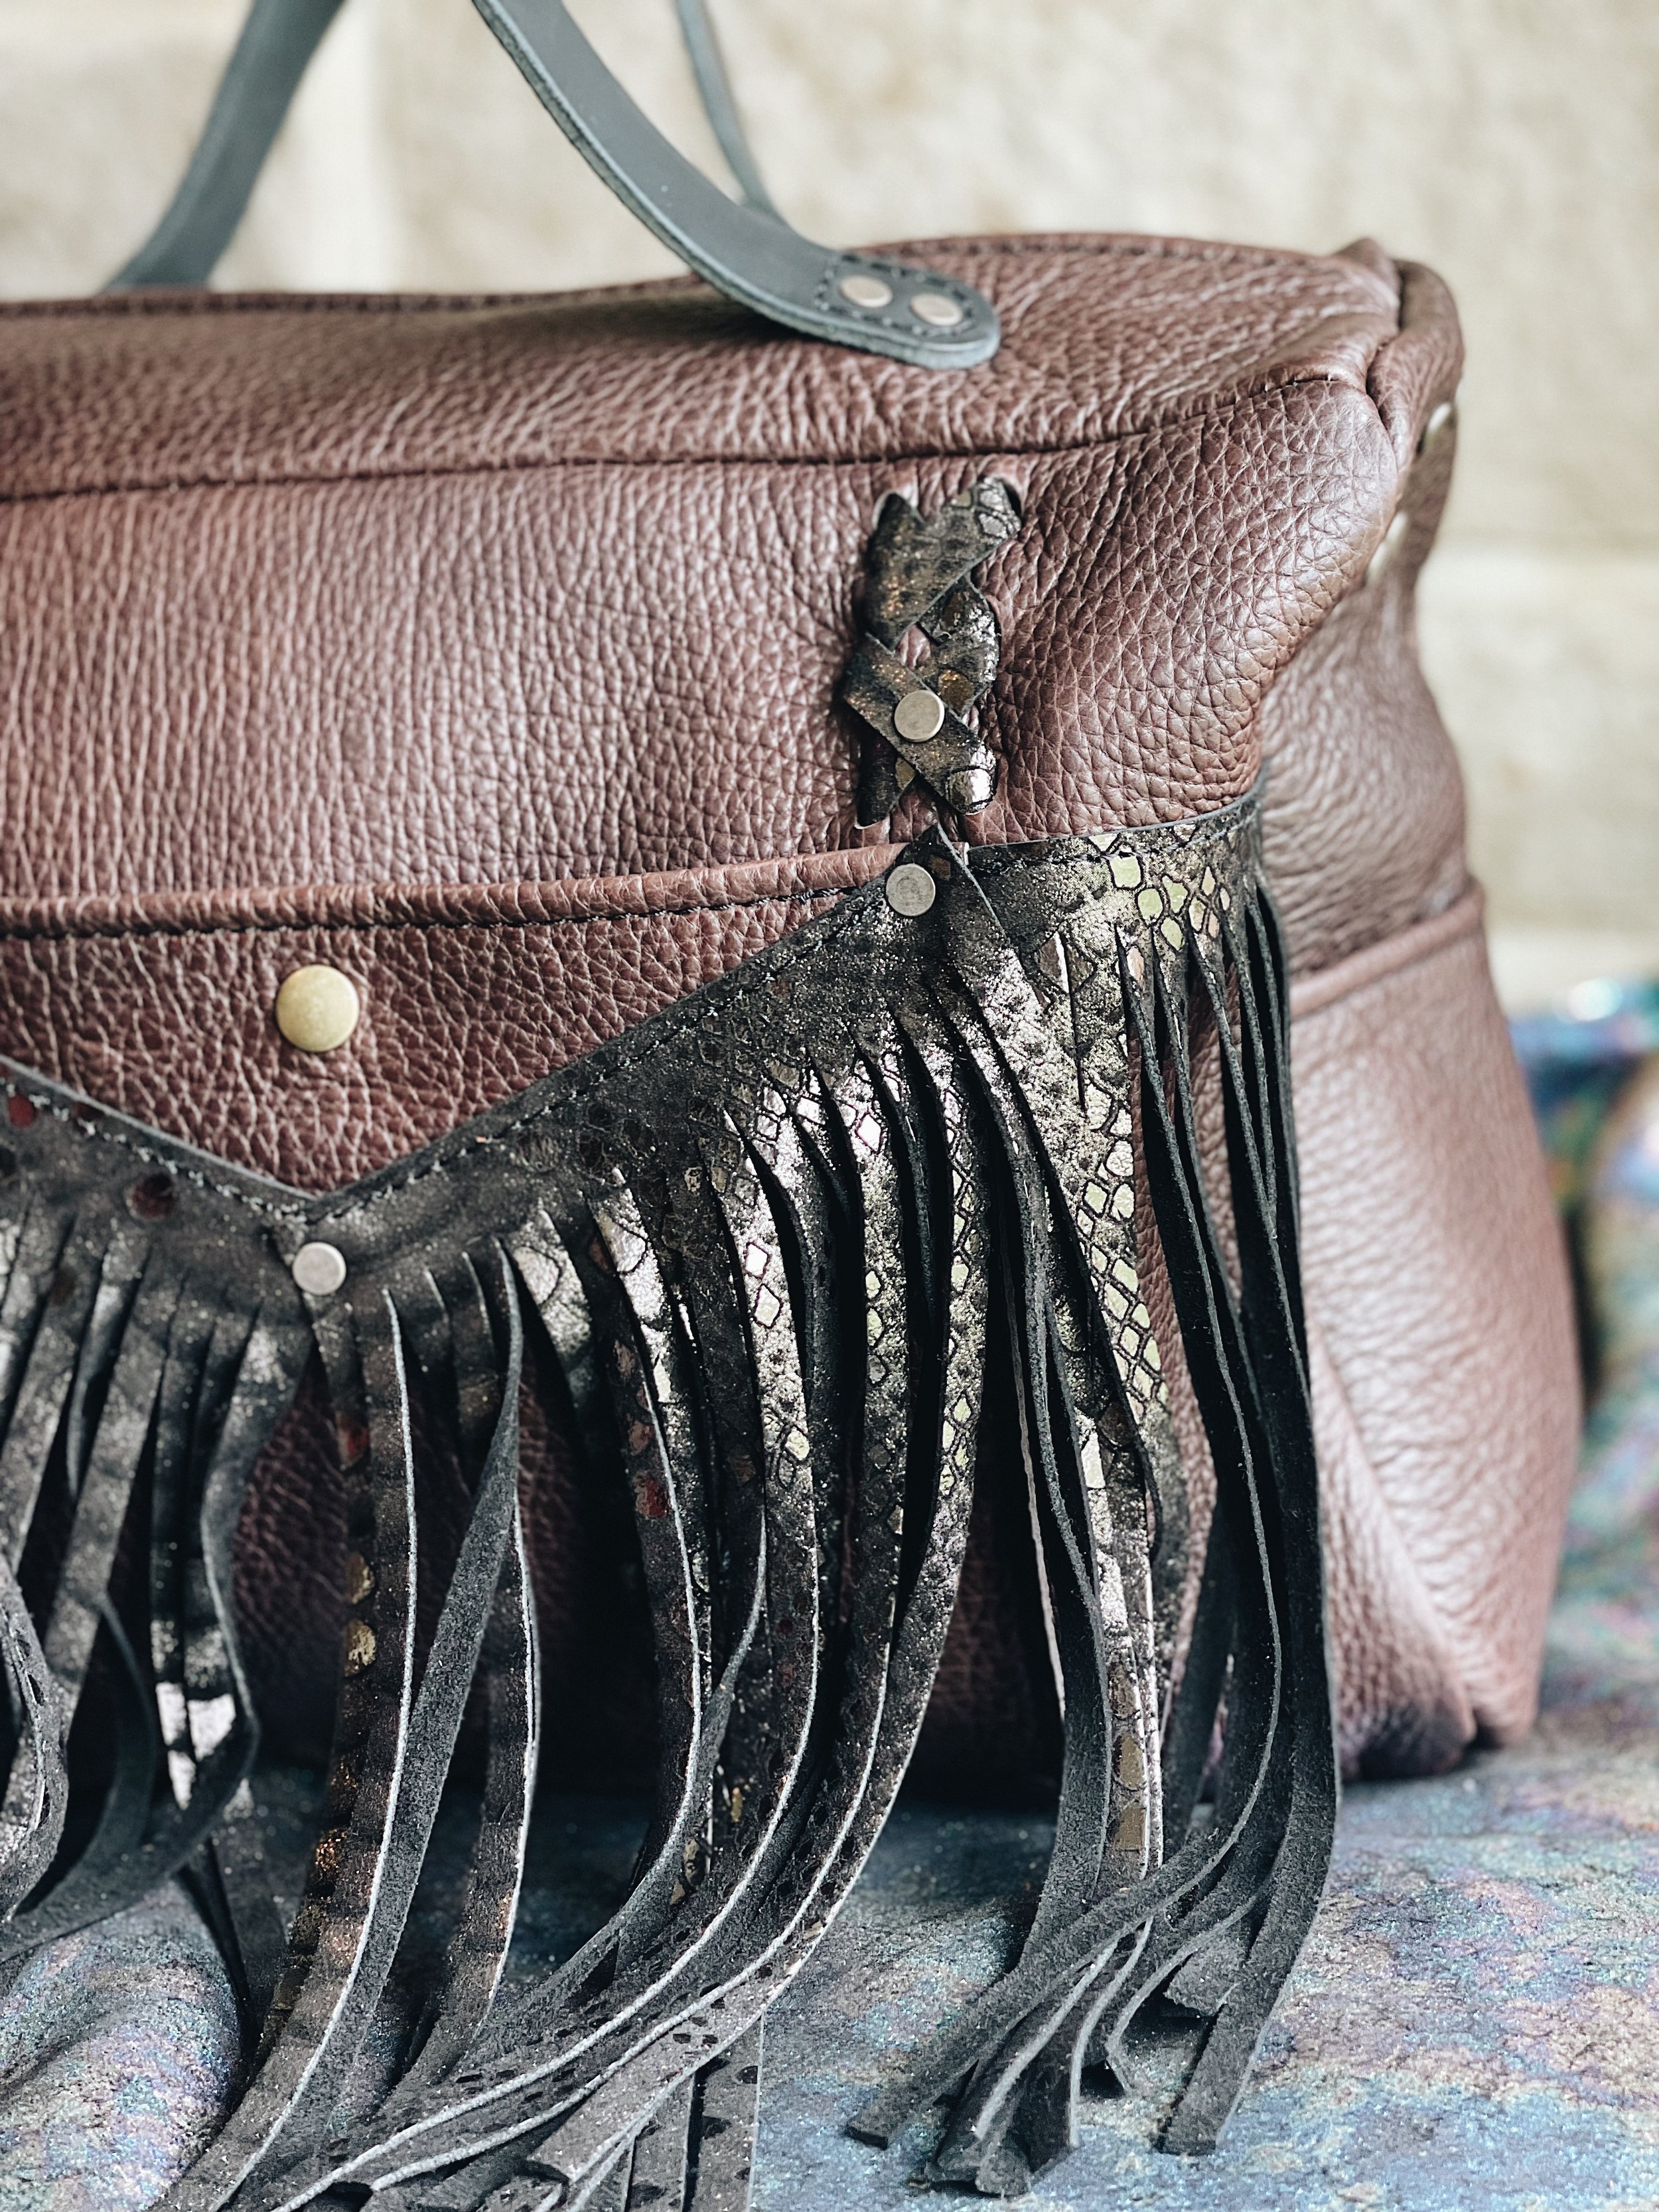  BODY: chocolate bison leather  FRINGE: custom requested*** black python leather  ADDITIONS: 2 simple handles  